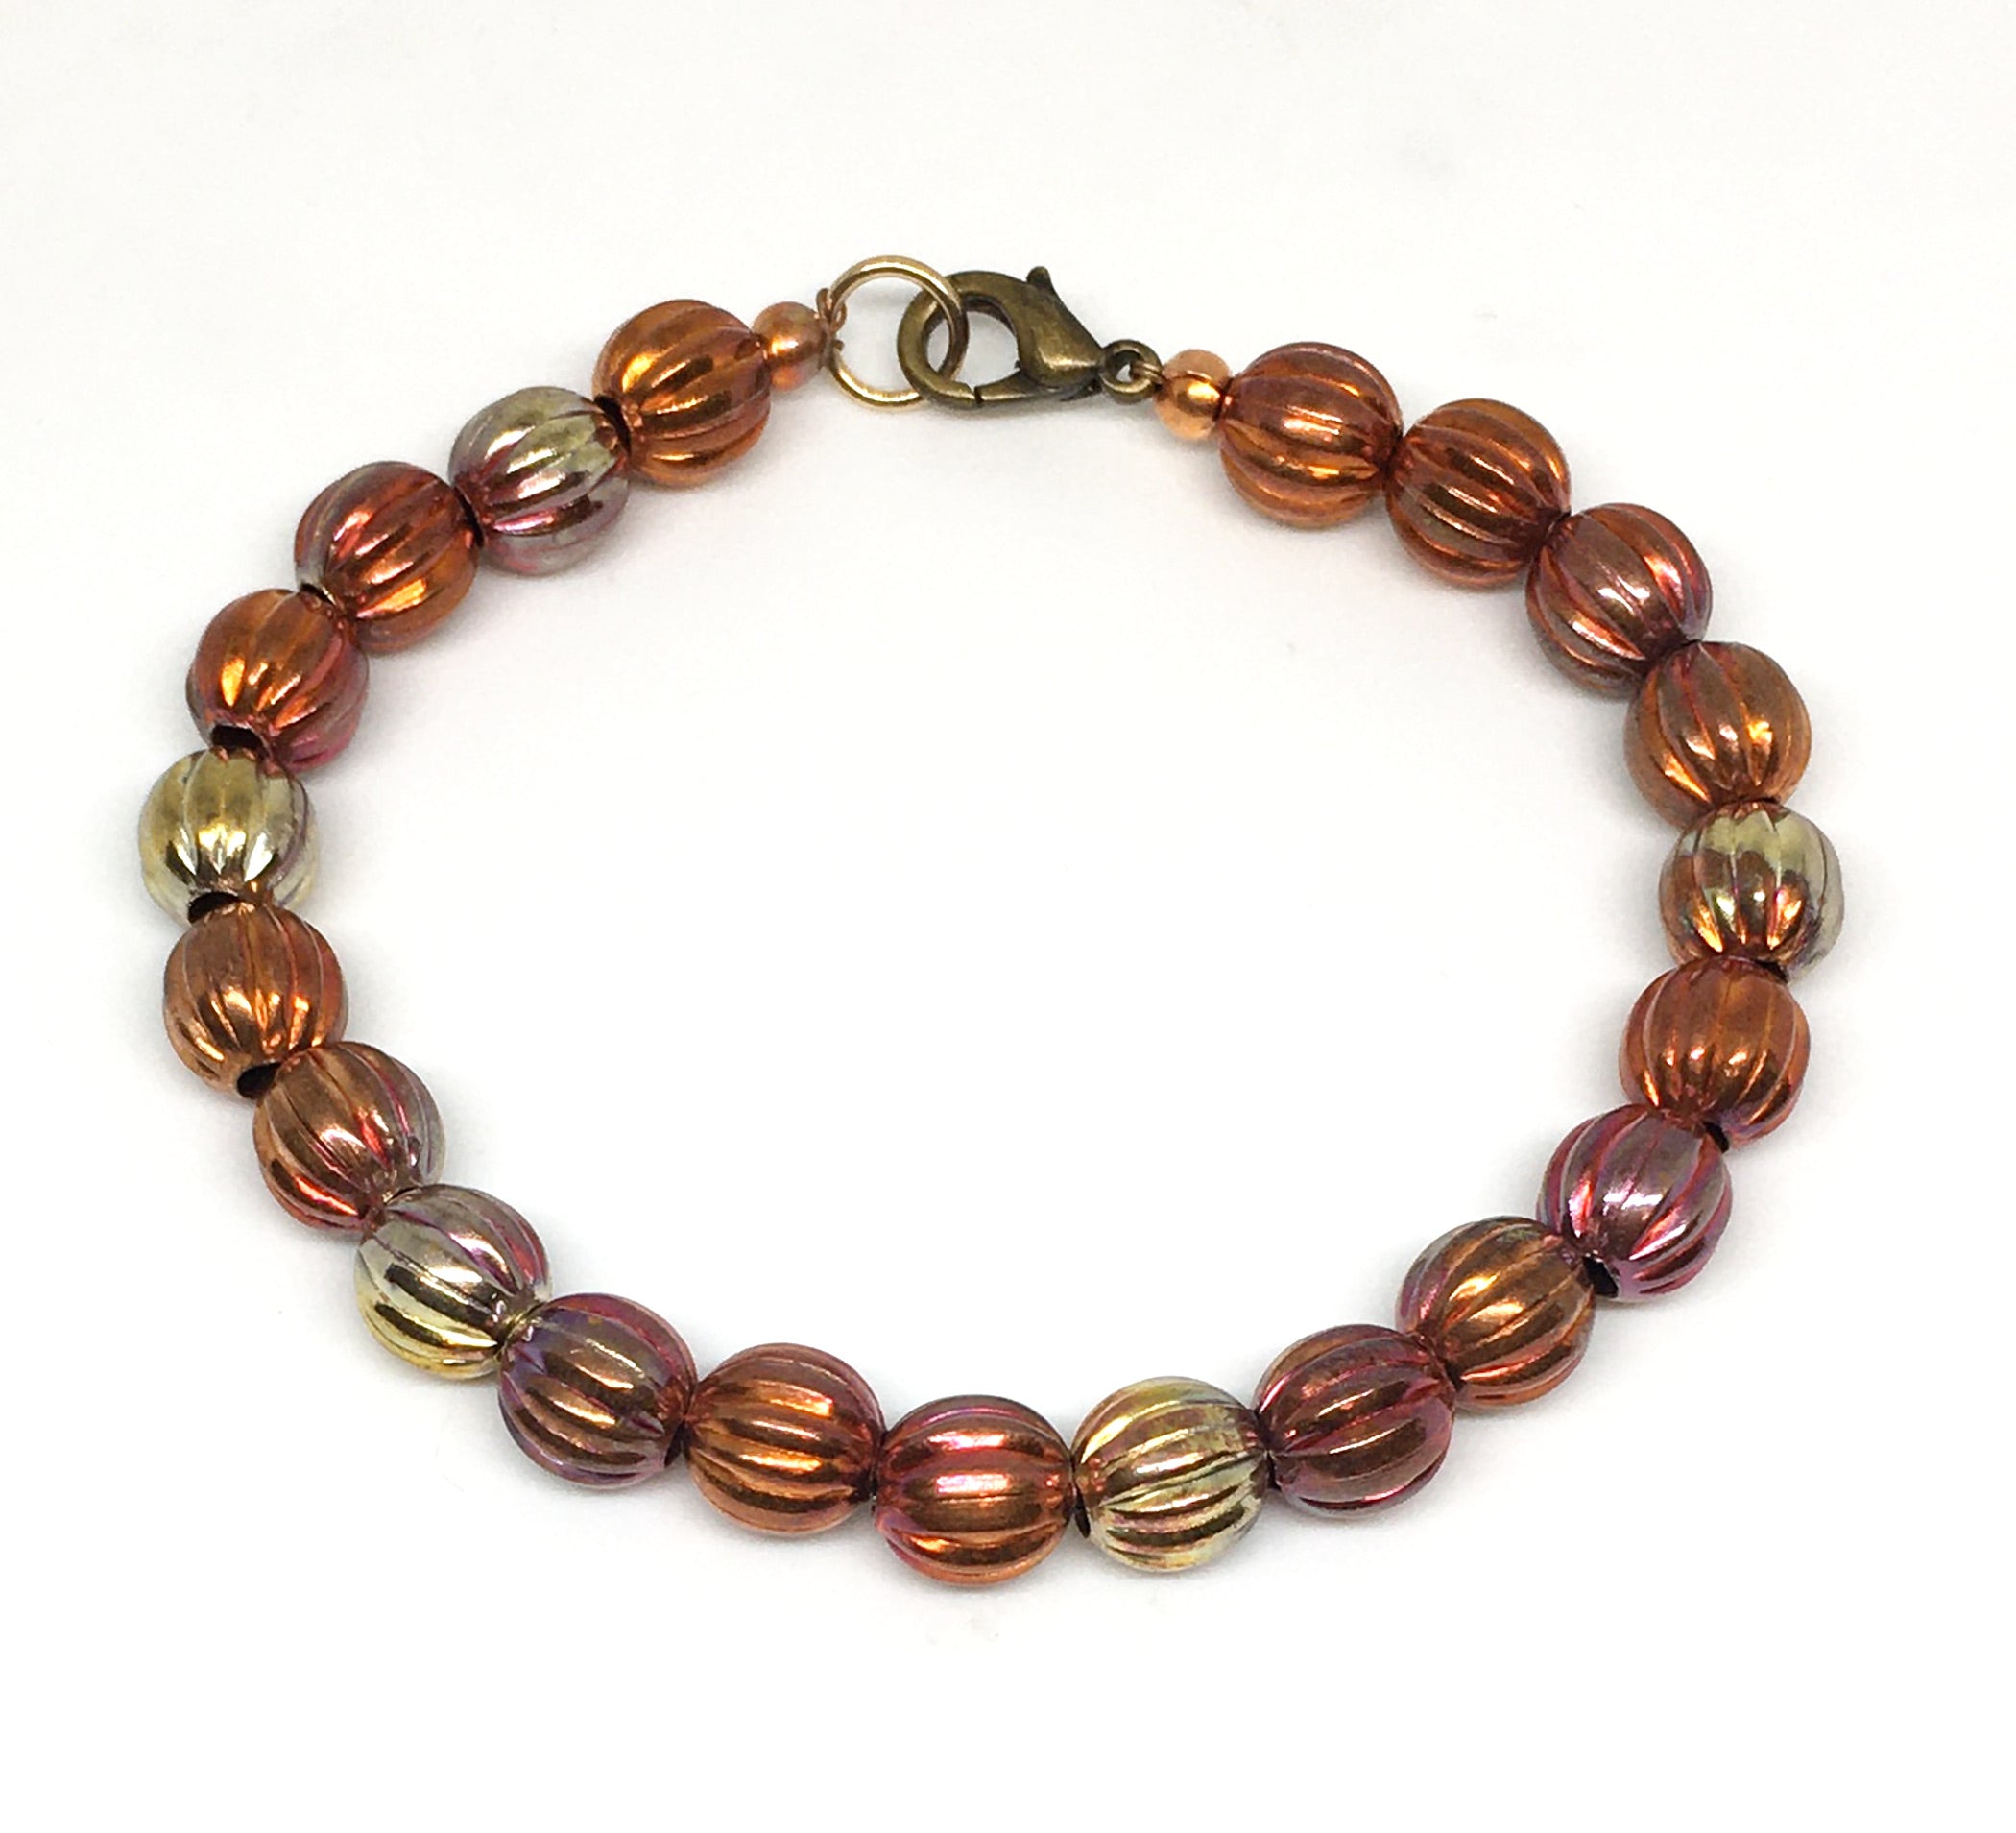 Sonoran Sunset Flame Painted Corrugated Copper Bead Bracelet - Large